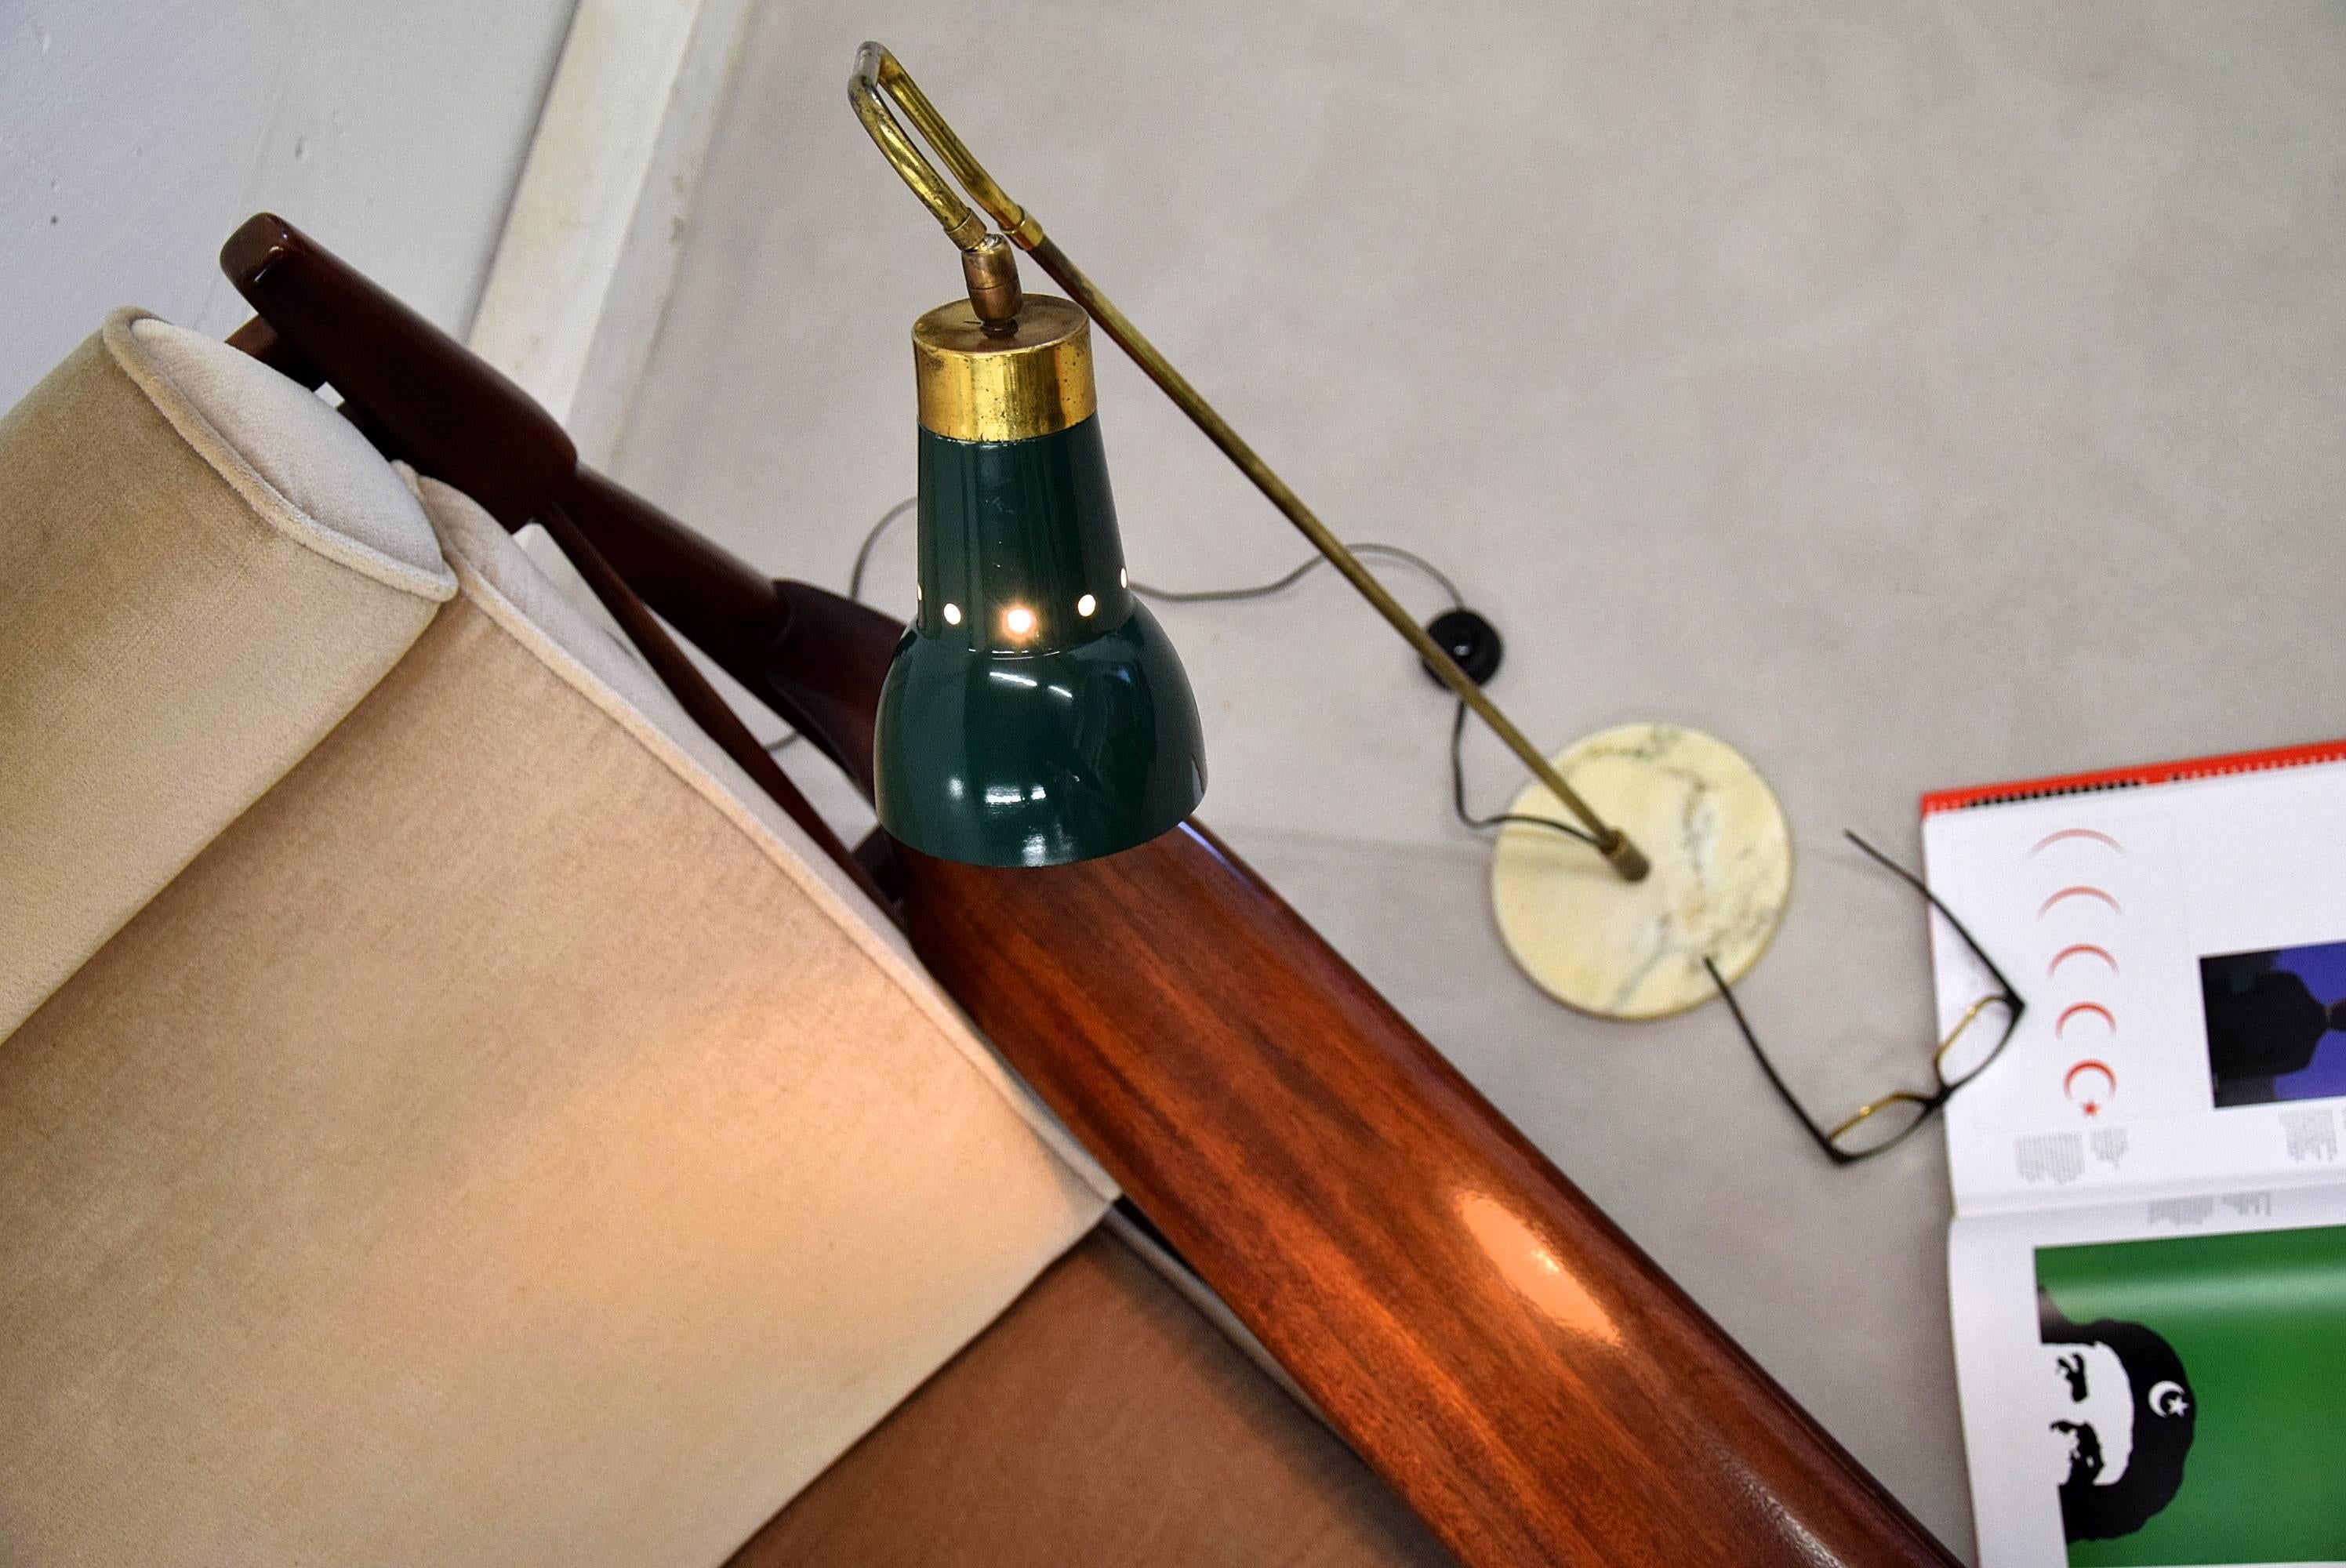 Brass and marble Mid century modern Floor lamp Stilux
Rare and sophisticated racing green brass and marble floor lamp produced by Stilux Italy in the 1950s.
As can be seen in the images is this beautiful lamp in great vintage condition and a jewel